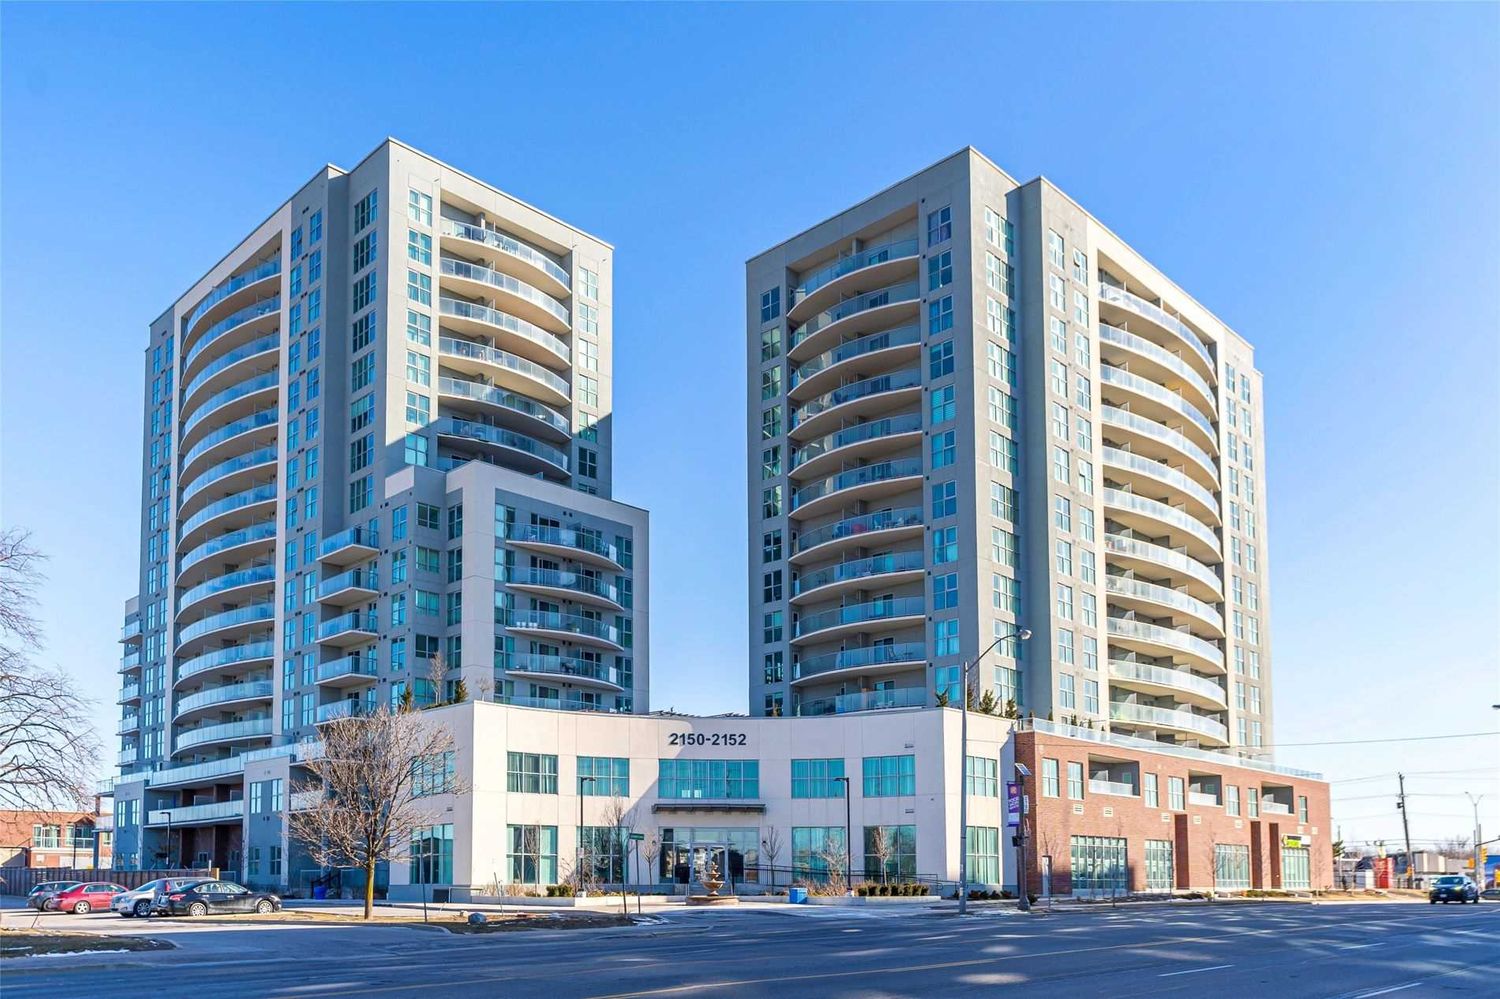 2150-2152 Lawrence Avenue E. 2150 Condos Phase 3 is located in  Scarborough, Toronto - image #1 of 2